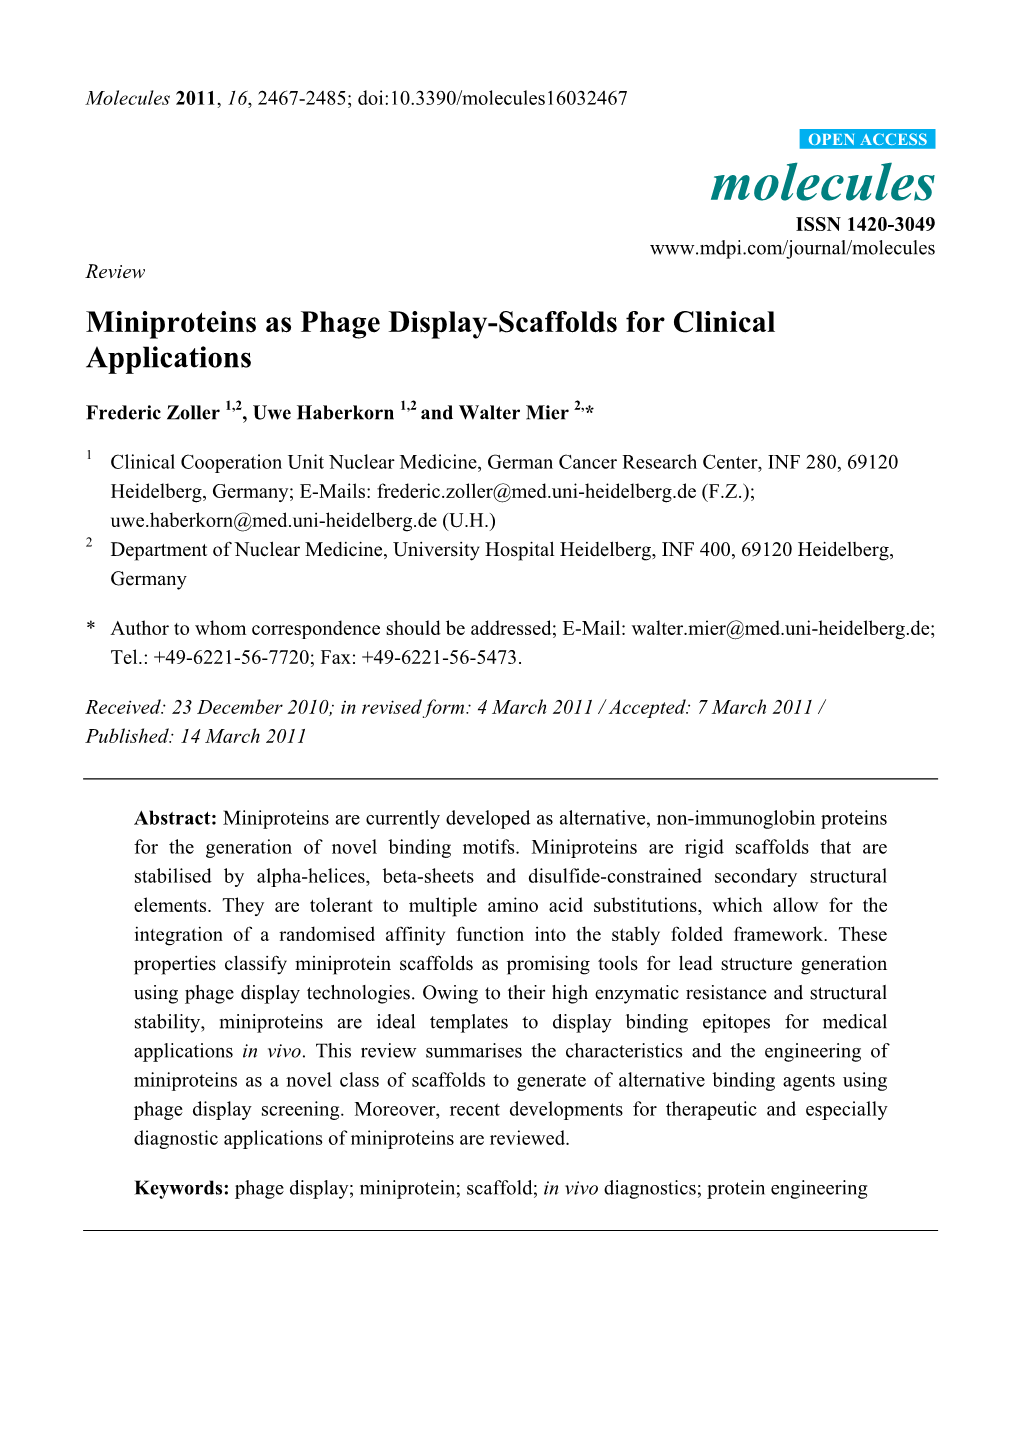 Miniproteins As Phage Display-Scaffolds for Clinical Applications